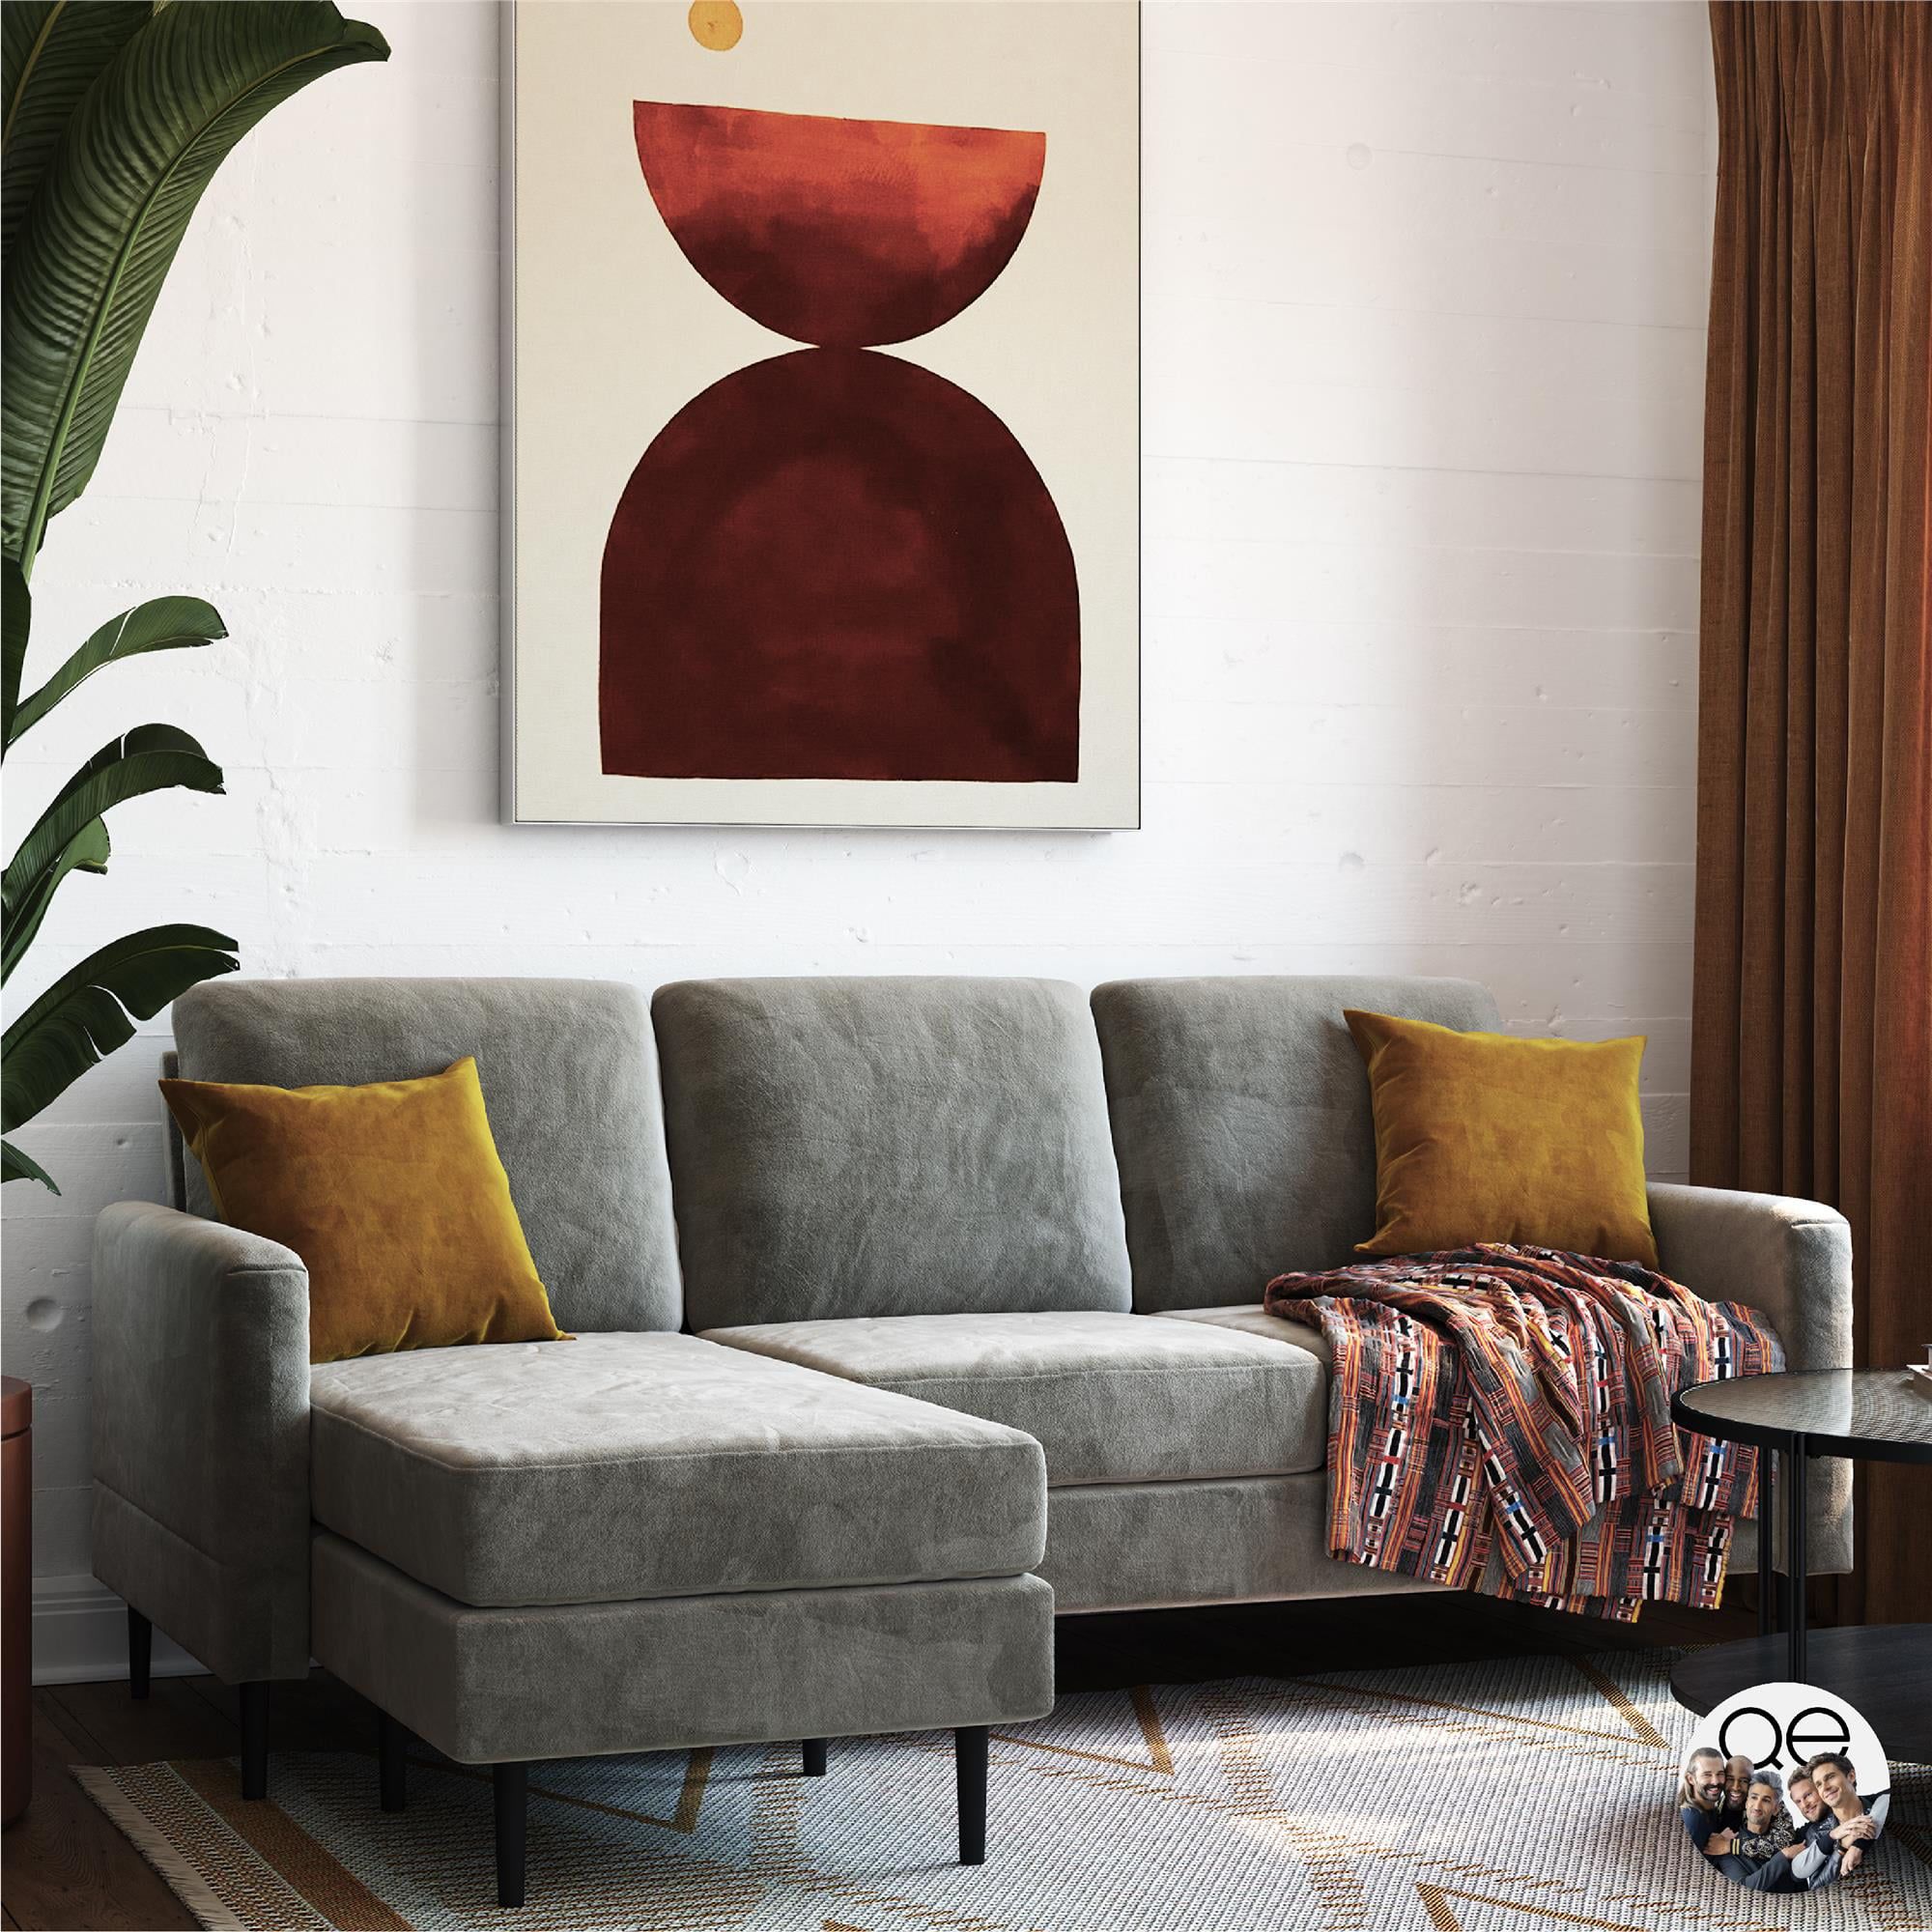 Queer Eye Wimberly Pillowback Sofa Sectional, Light Gray Velvet –  Walmart In Pillowback Sofa Sectionals (Gallery 1 of 20)